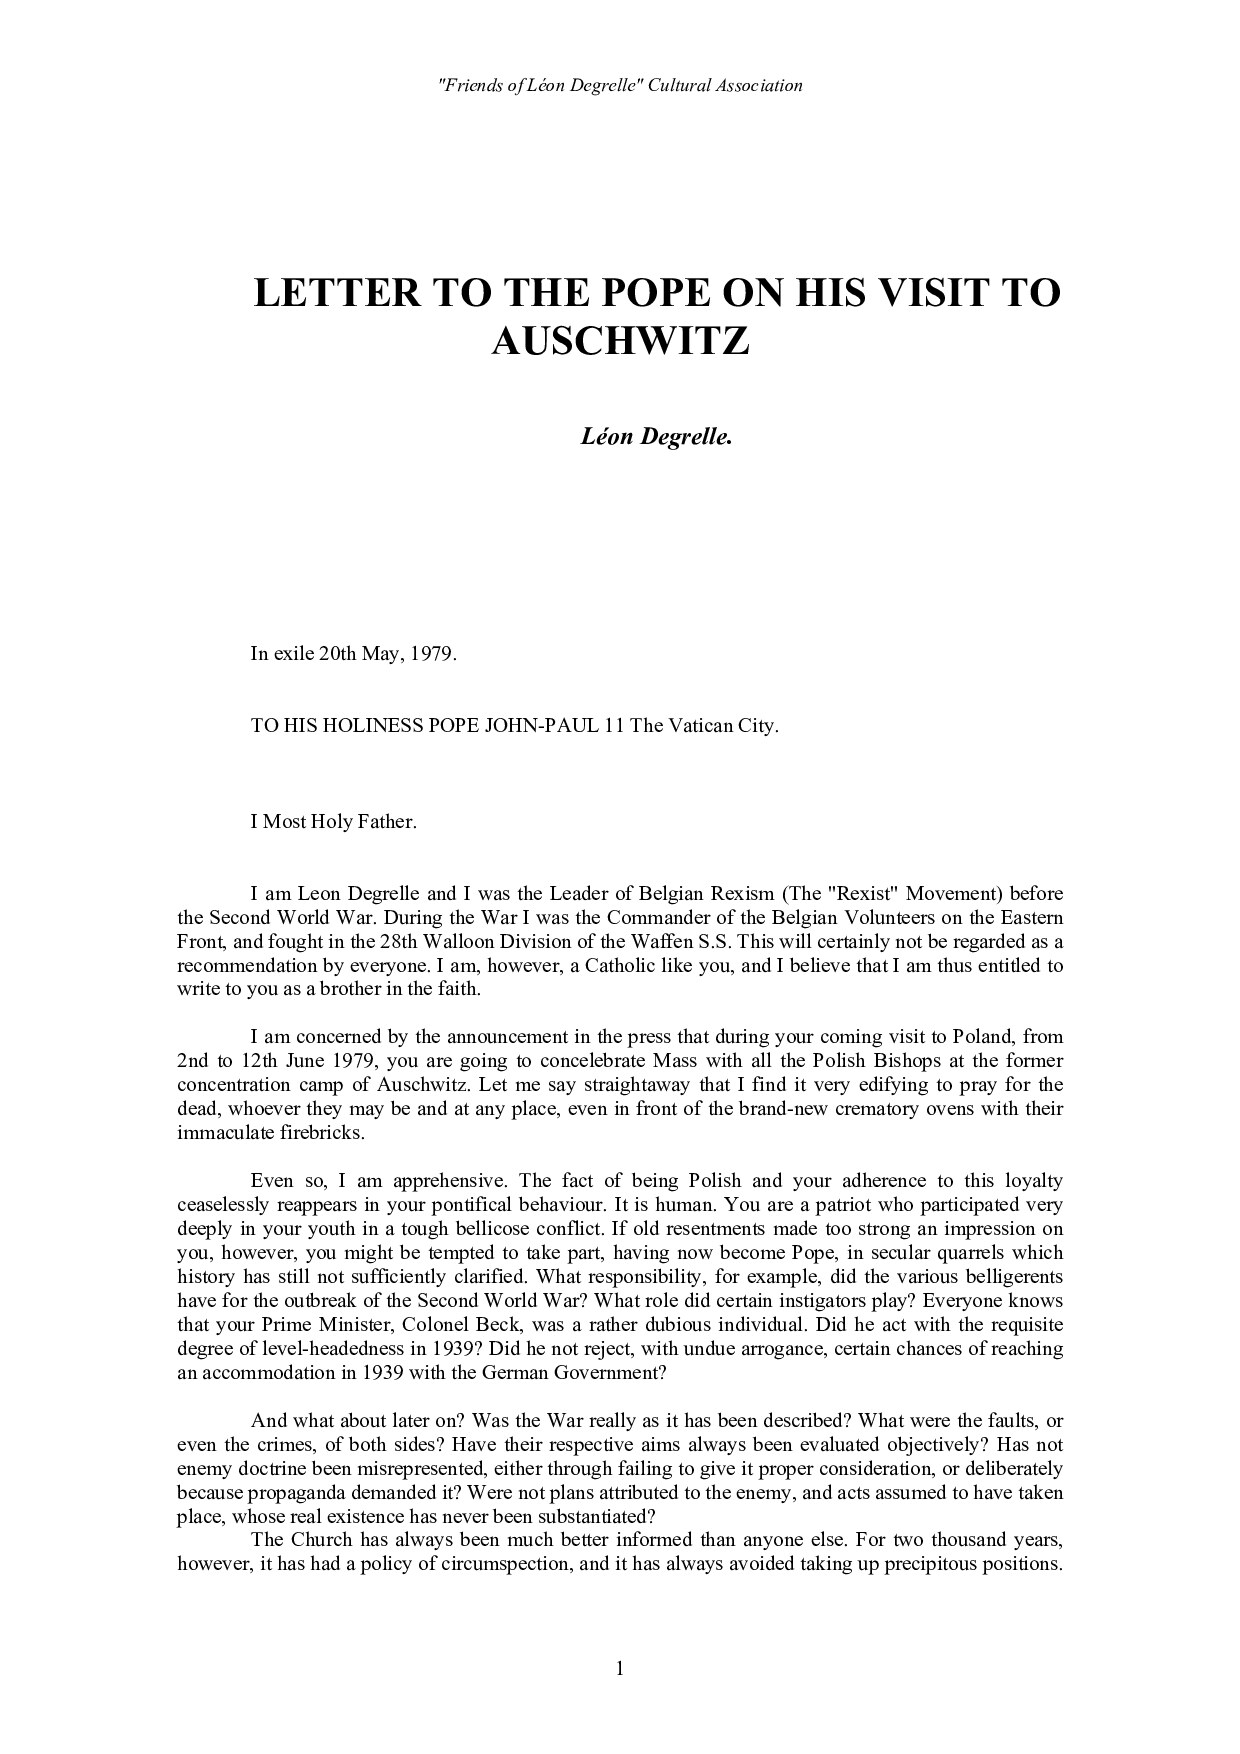 Degrelle, Léon; Letter to the Pope on his Visit to Auschwitz